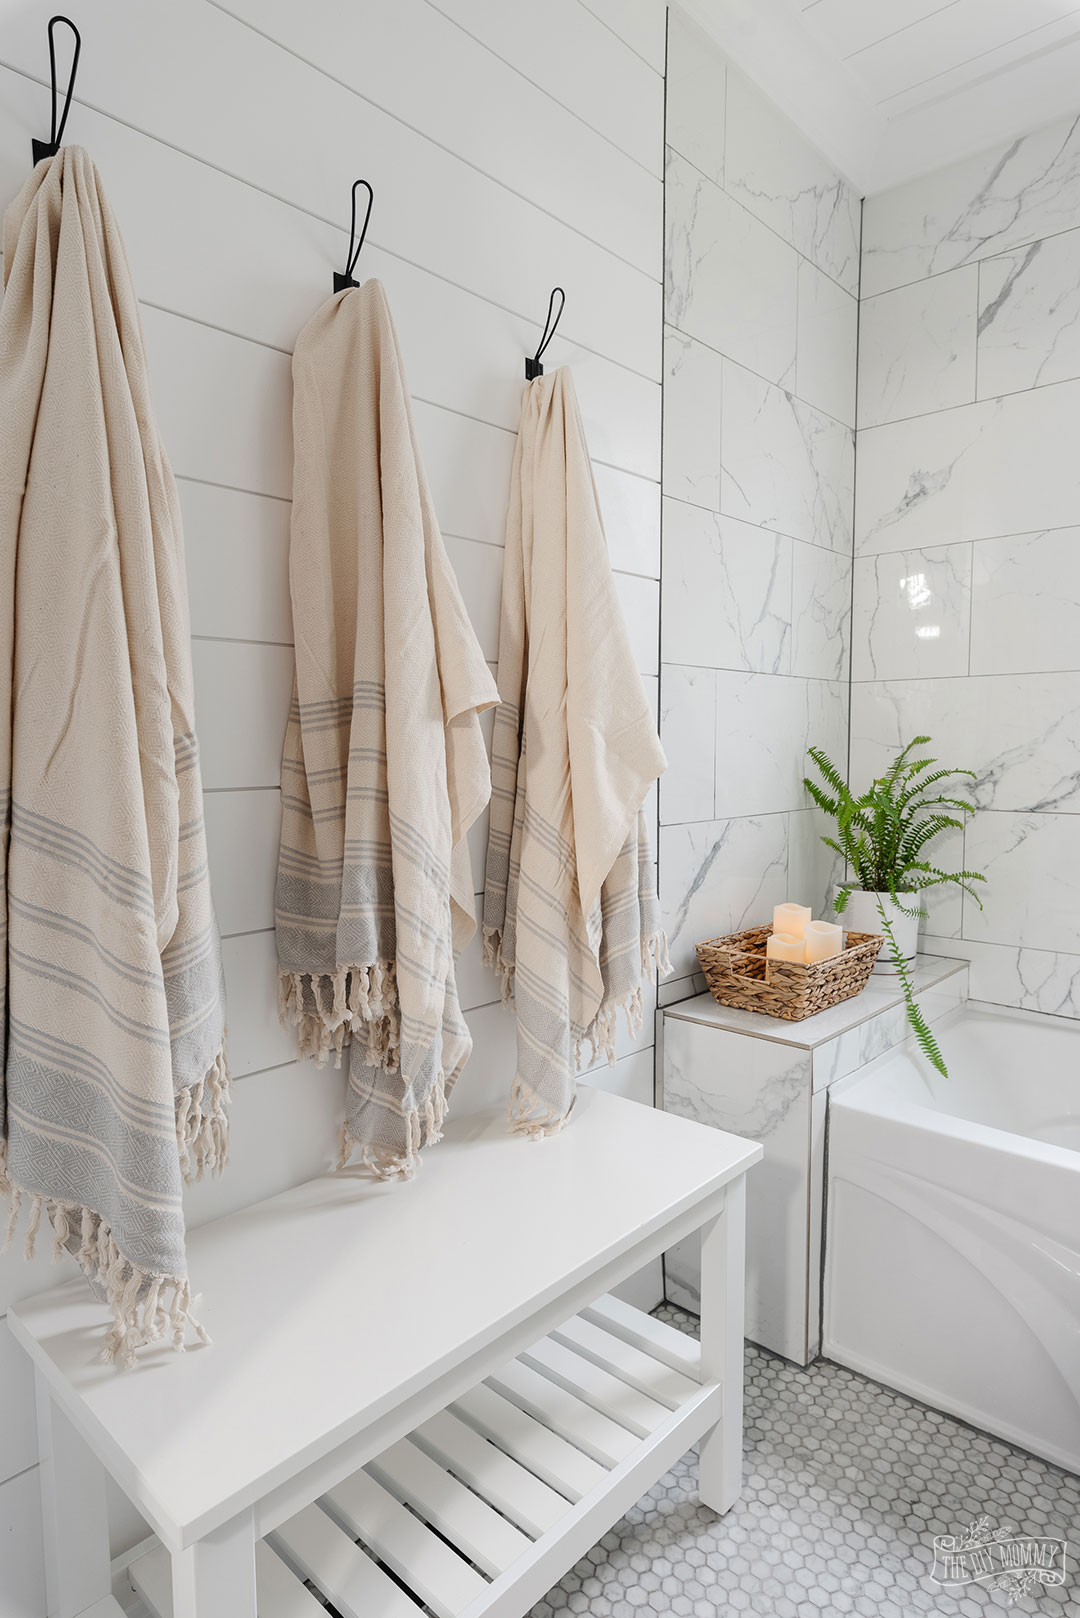 Modern coastal inspired bathroom renovation with marble tile, shiplap, gold and black accessories, clear shower door, blue and white colors & rattan accents